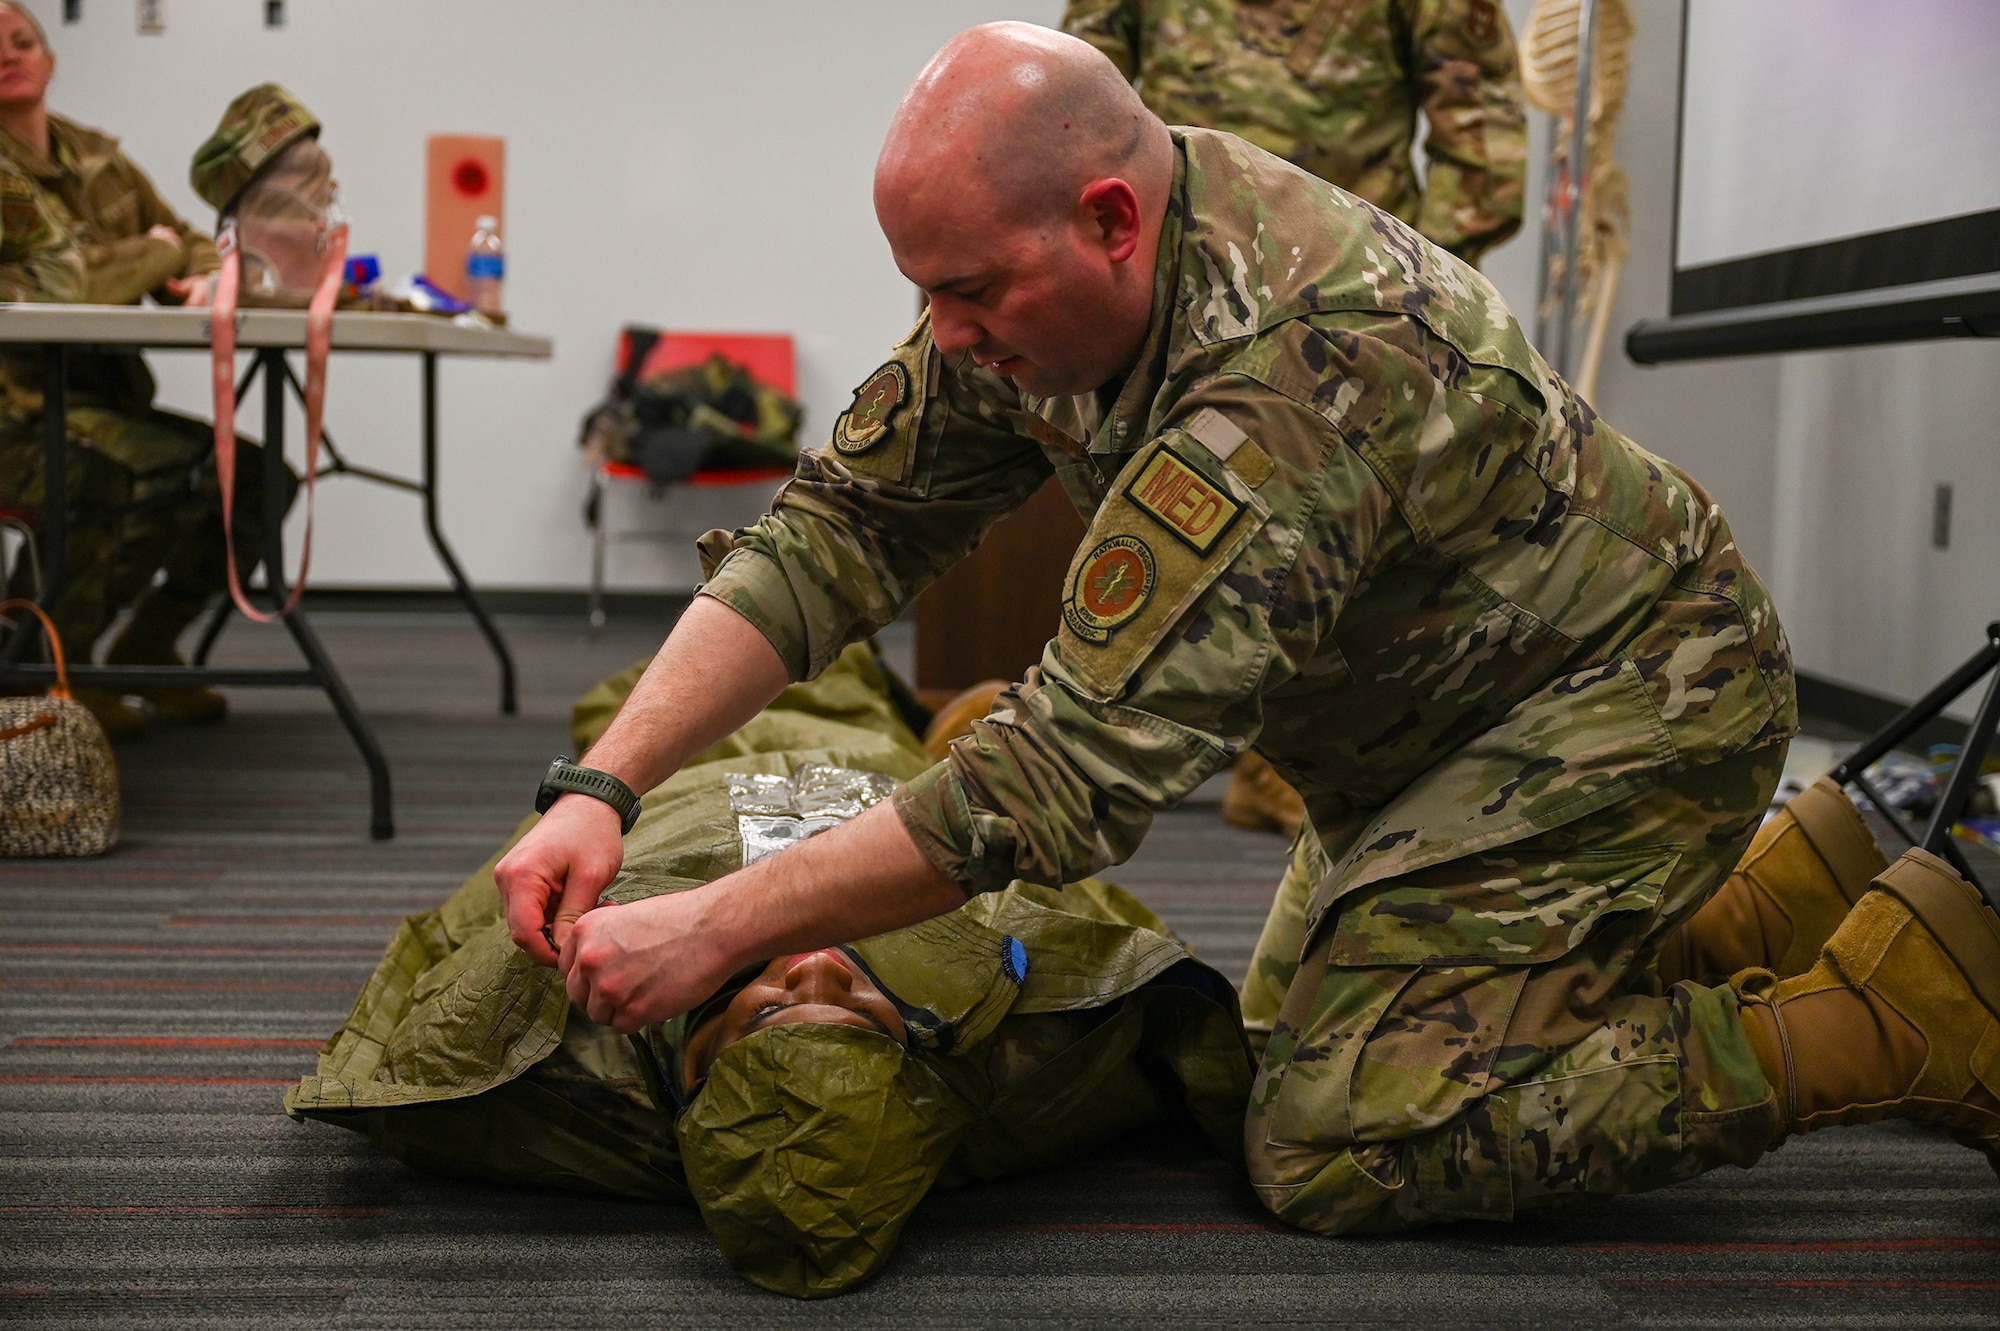 Tech. Sgt. Anthony Marrazzi, 445th Aerospace Medicine Squadron flight and operational medical technician, covers Staff Sgt. Jamal Chandler, 445th AMDS optometry technician, to demonstrate tactical field care for hyperthermia at Wright-Patterson AFB, Ohio, March 11, 2024.